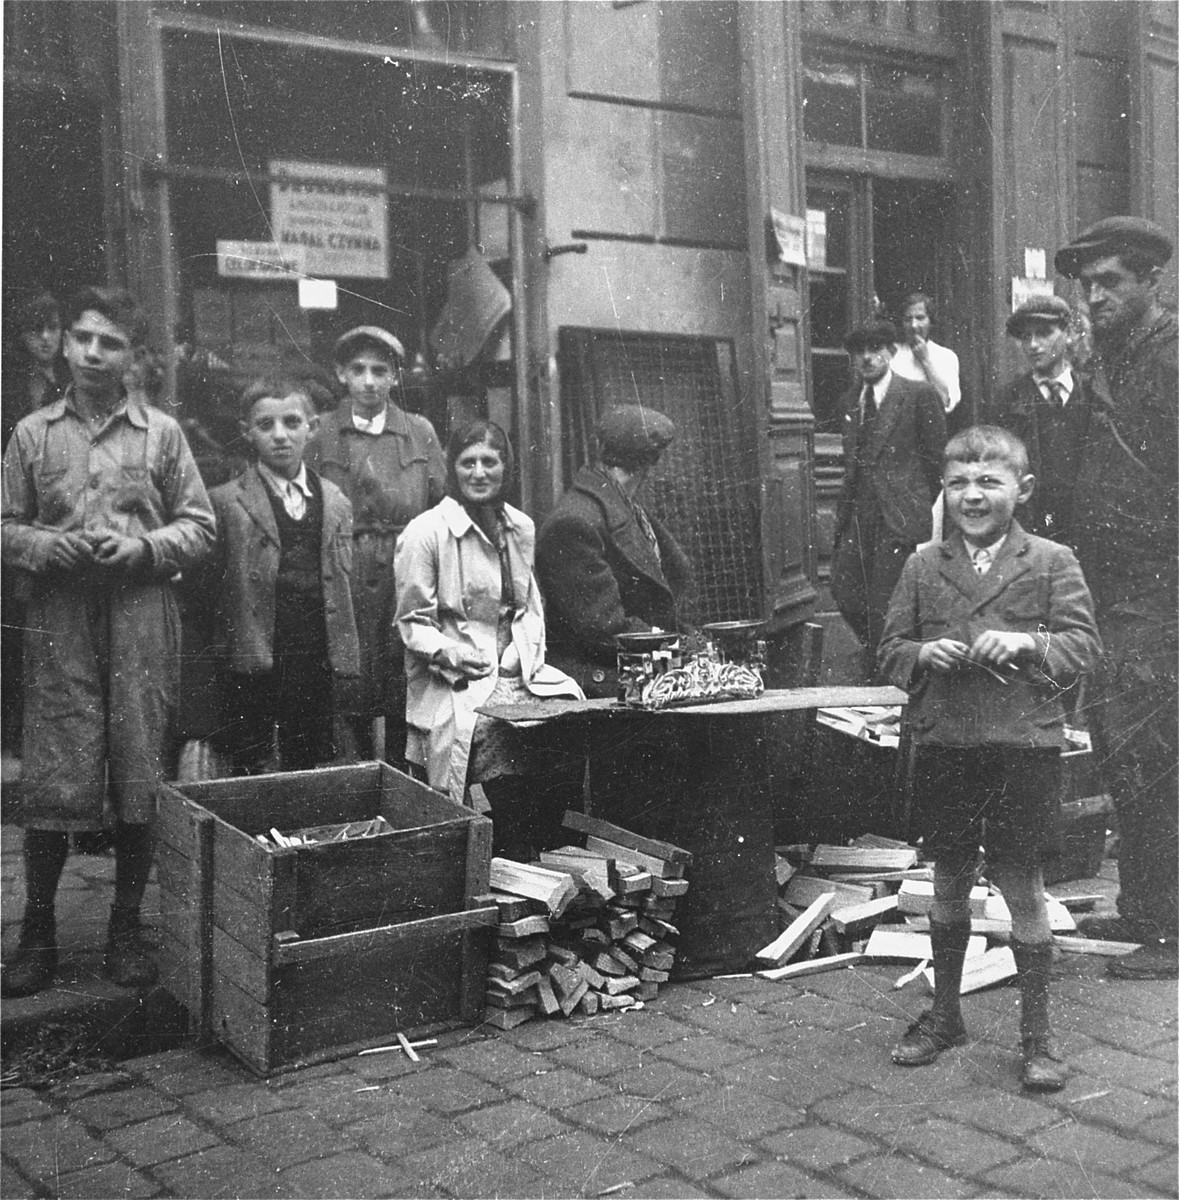 Vendors sell blocks of wood and kindling on the street in the Warsaw ghetto.  

Joest's original caption reads: "Both of these vendors weighed pieces of wood and kindling with a kitchen scale.  Truly, with the scale!"